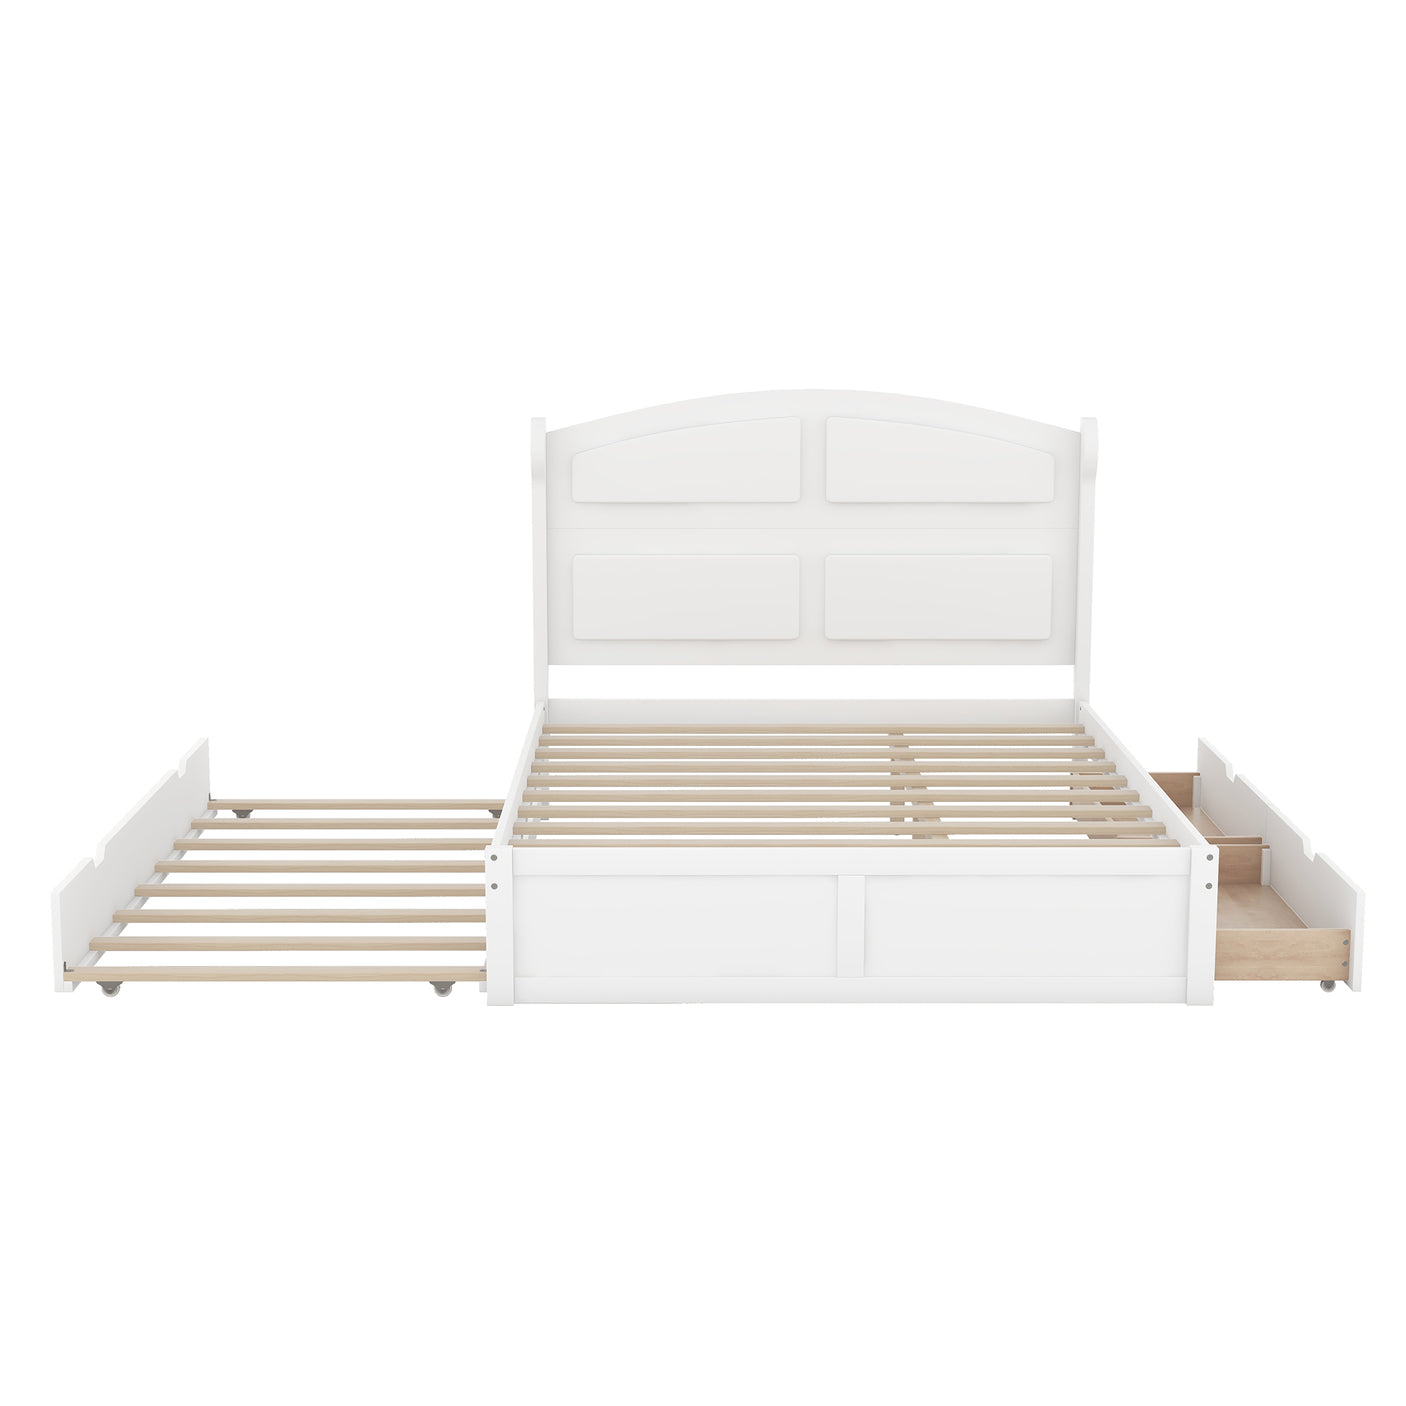 Wood Queen Size Platform Bed with Twin Size Trundle and 2 Drawers, White(Expected Arrival Time: 9.2)